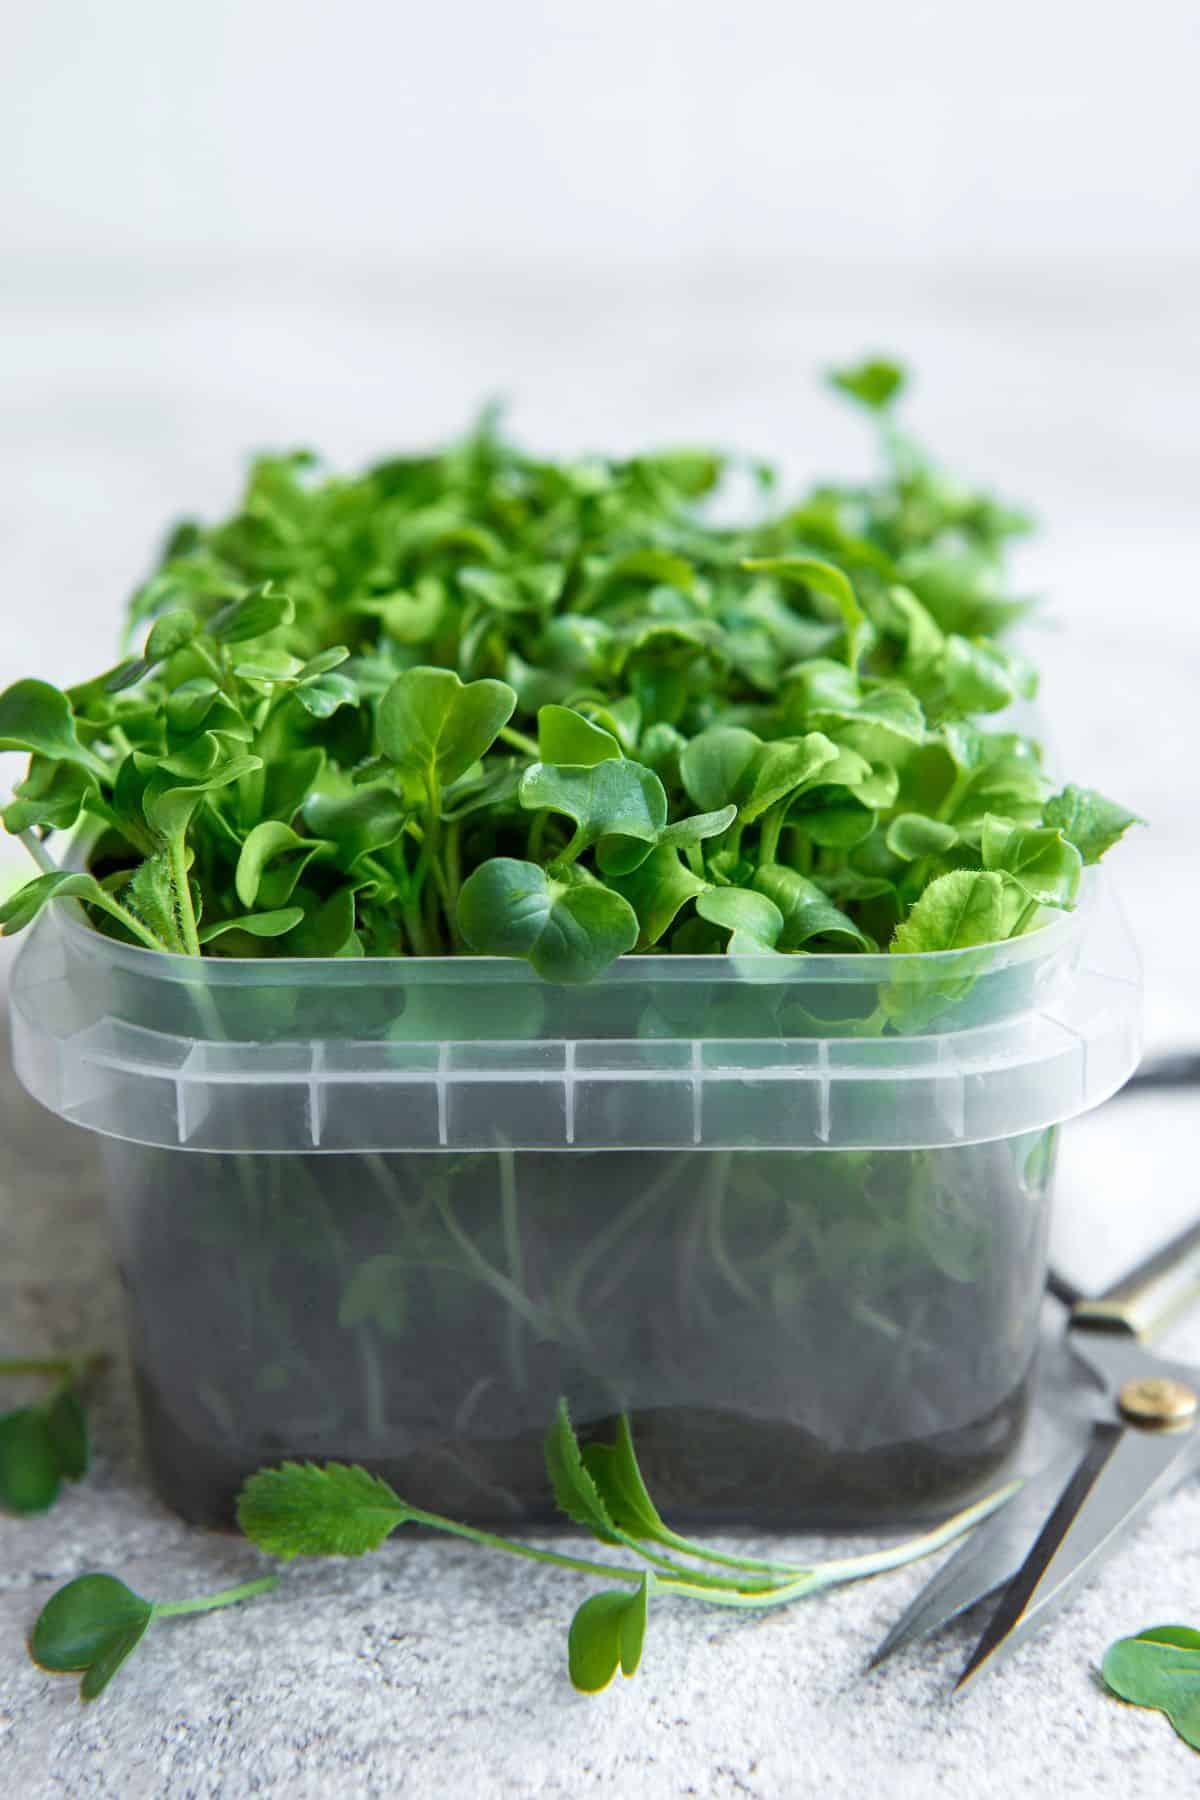 radish microgreens growing in a small container.